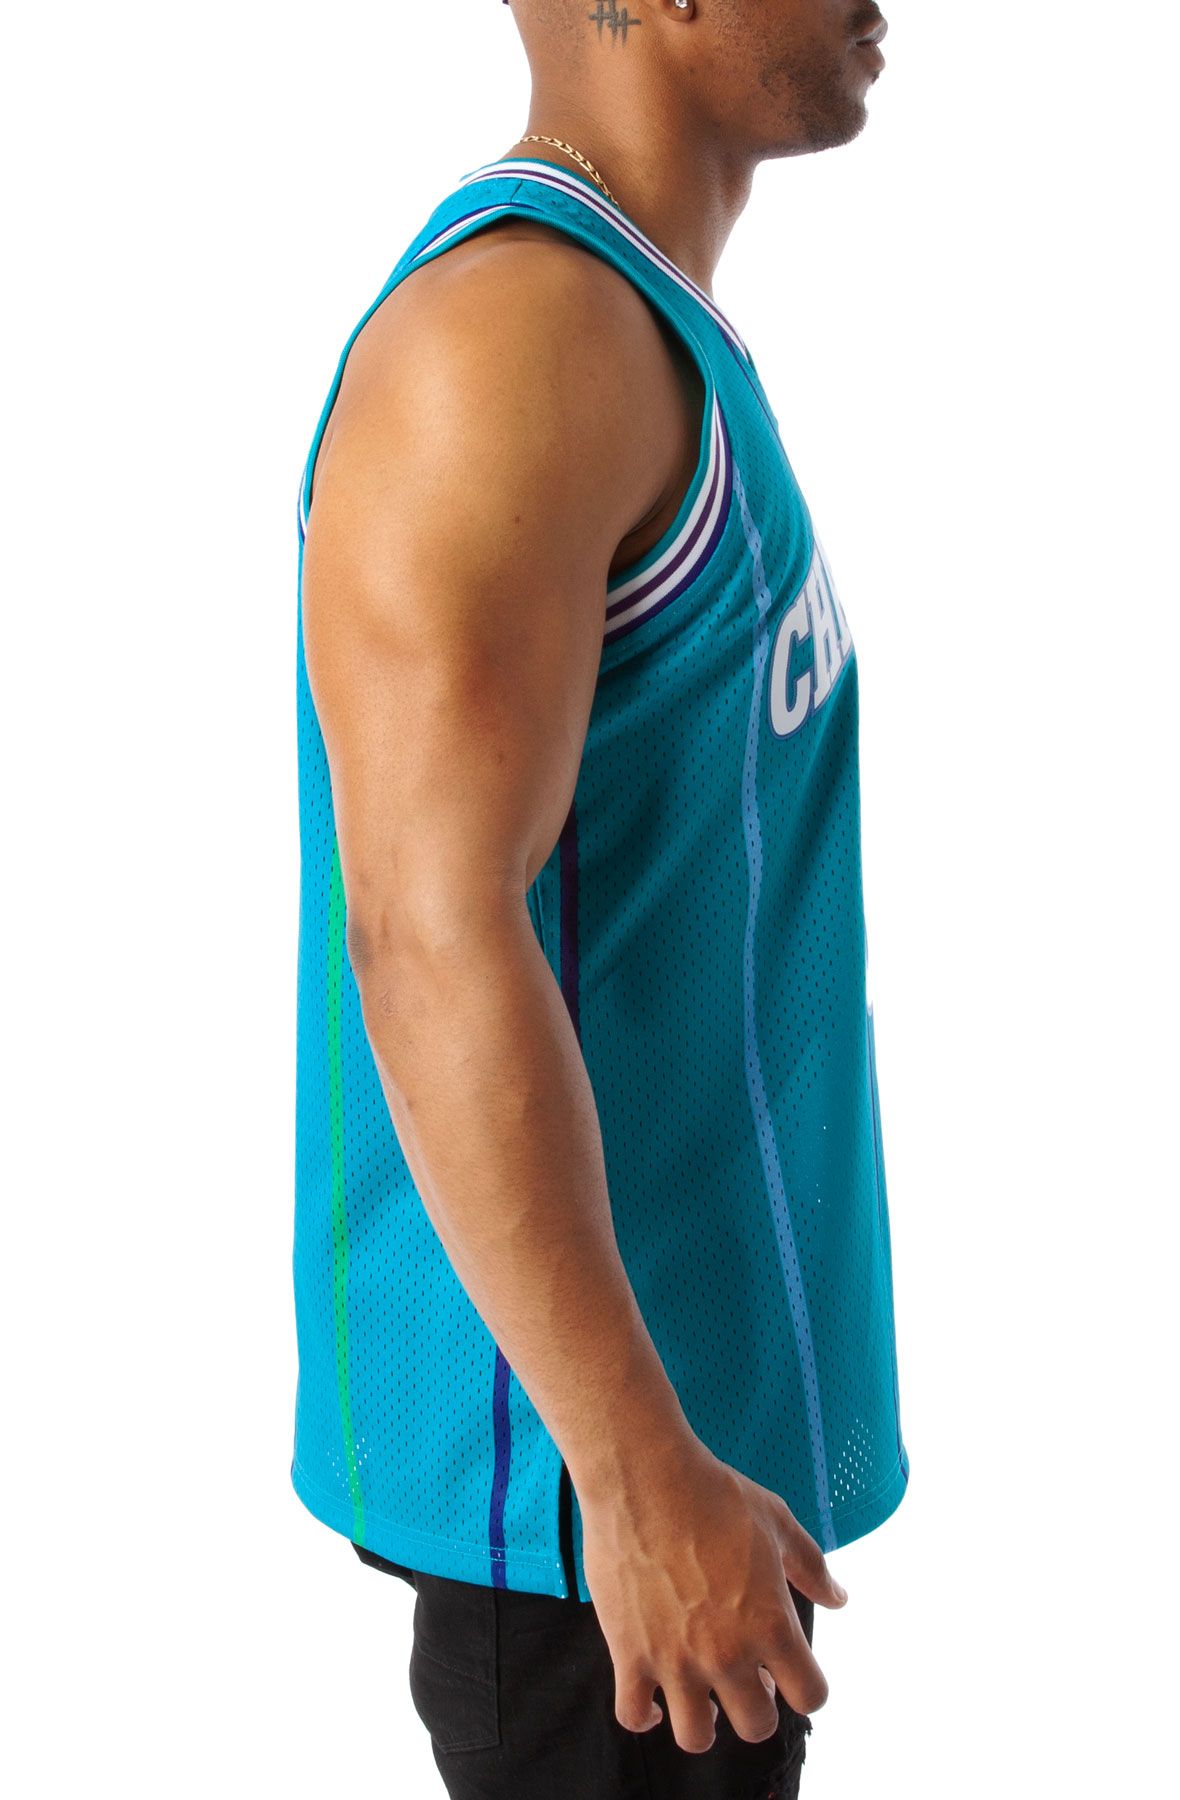 dell curry charlotte hornets jersey